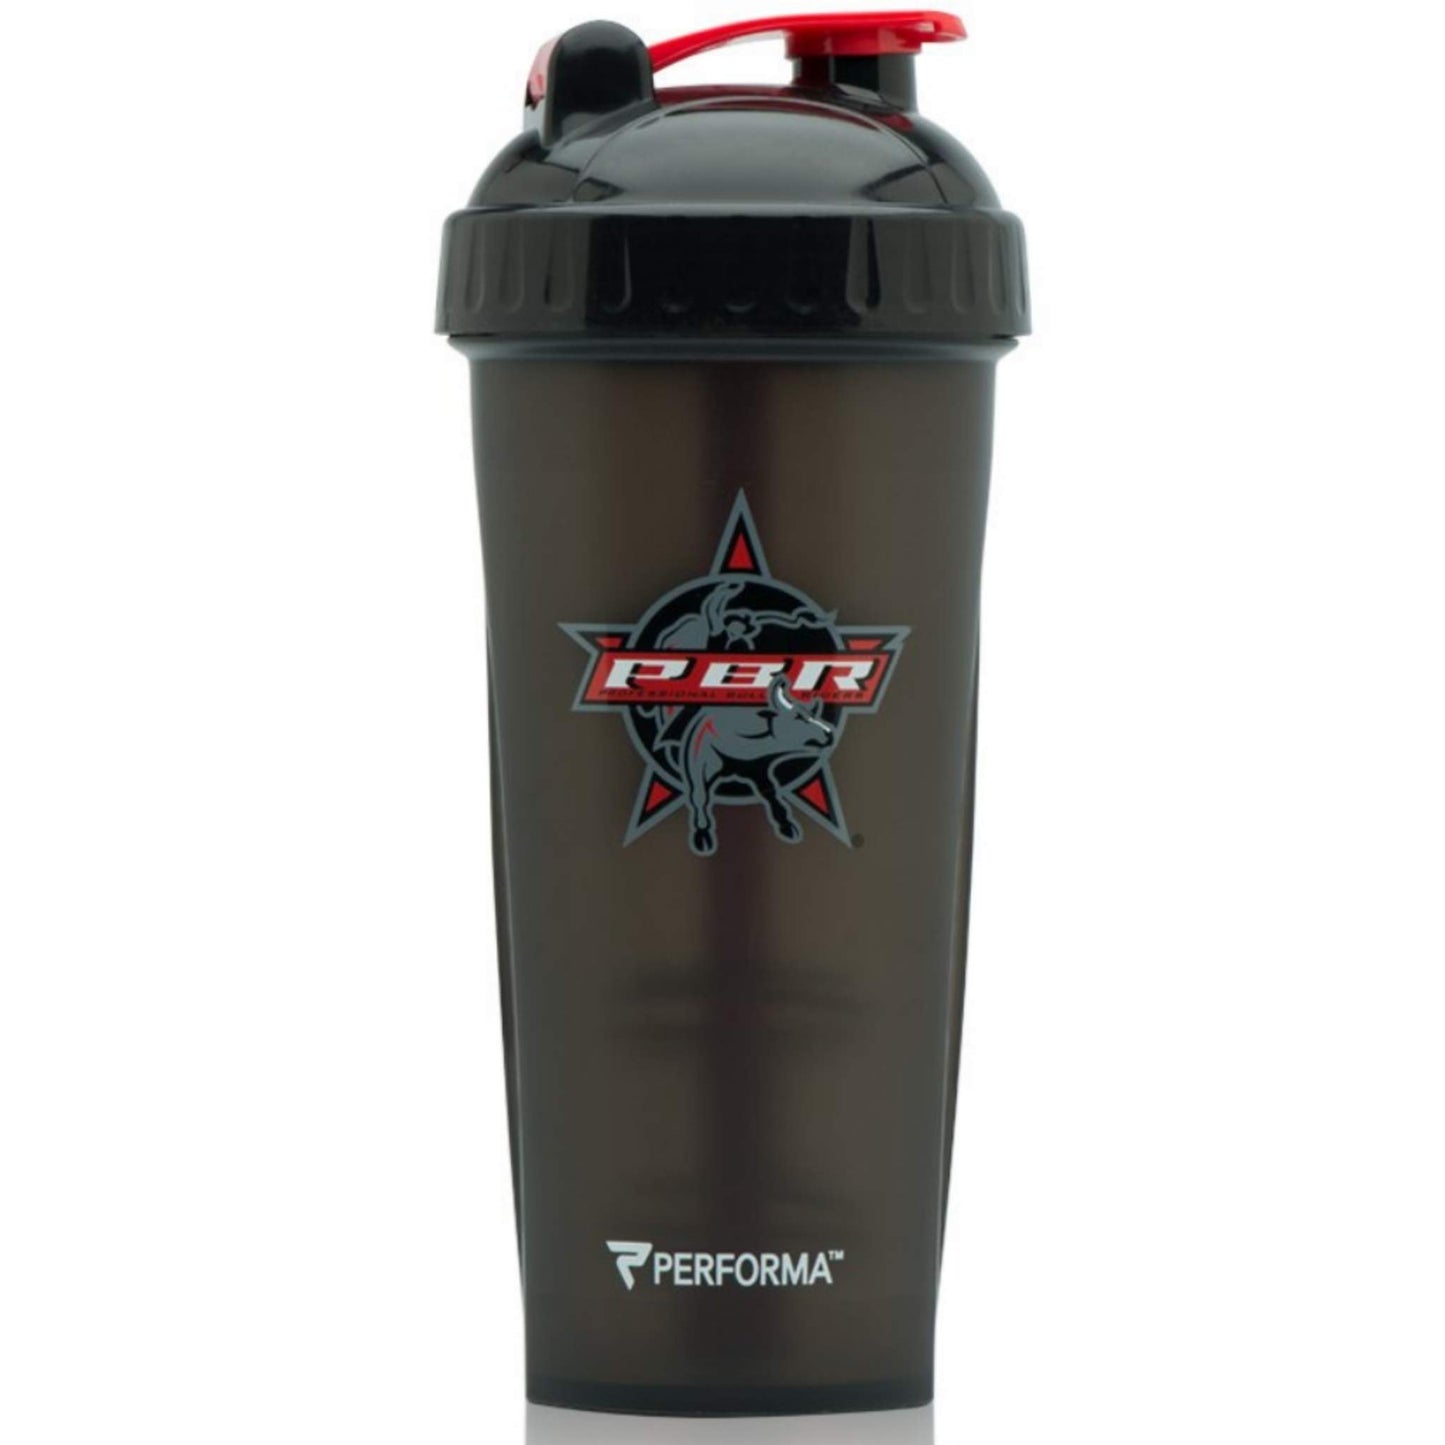 Performa - CLASSIC Shaker Cup, 28oz, PBR (Professional Bull Riding), Team Perfect